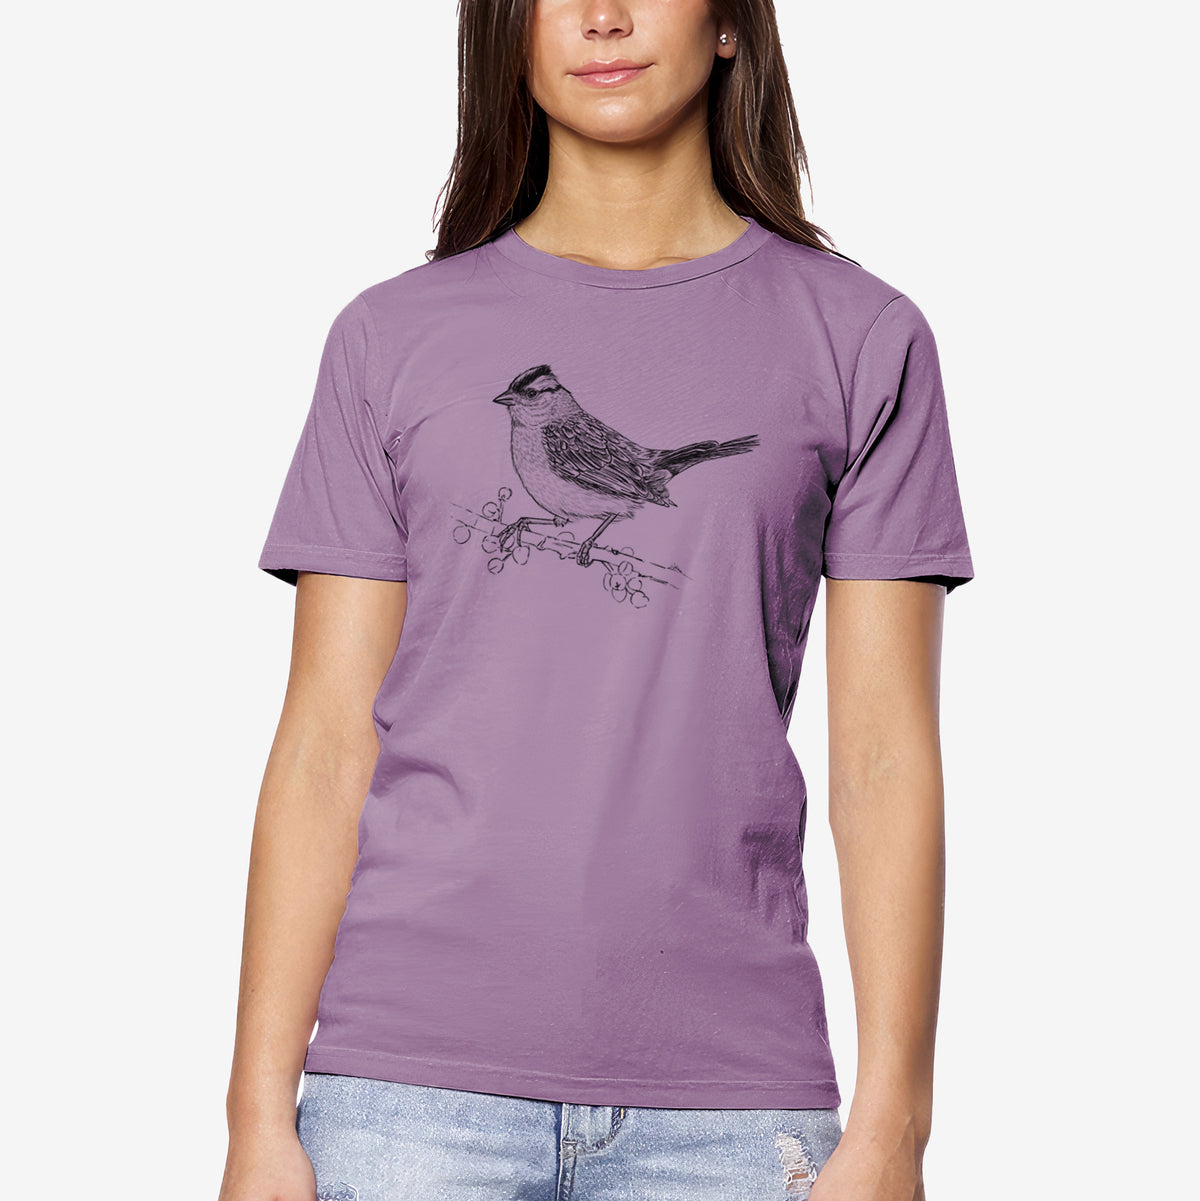 White-crowned Sparrow - Zonotrichia leucophrys - Unisex Crewneck - Made in USA - 100% Organic Cotton